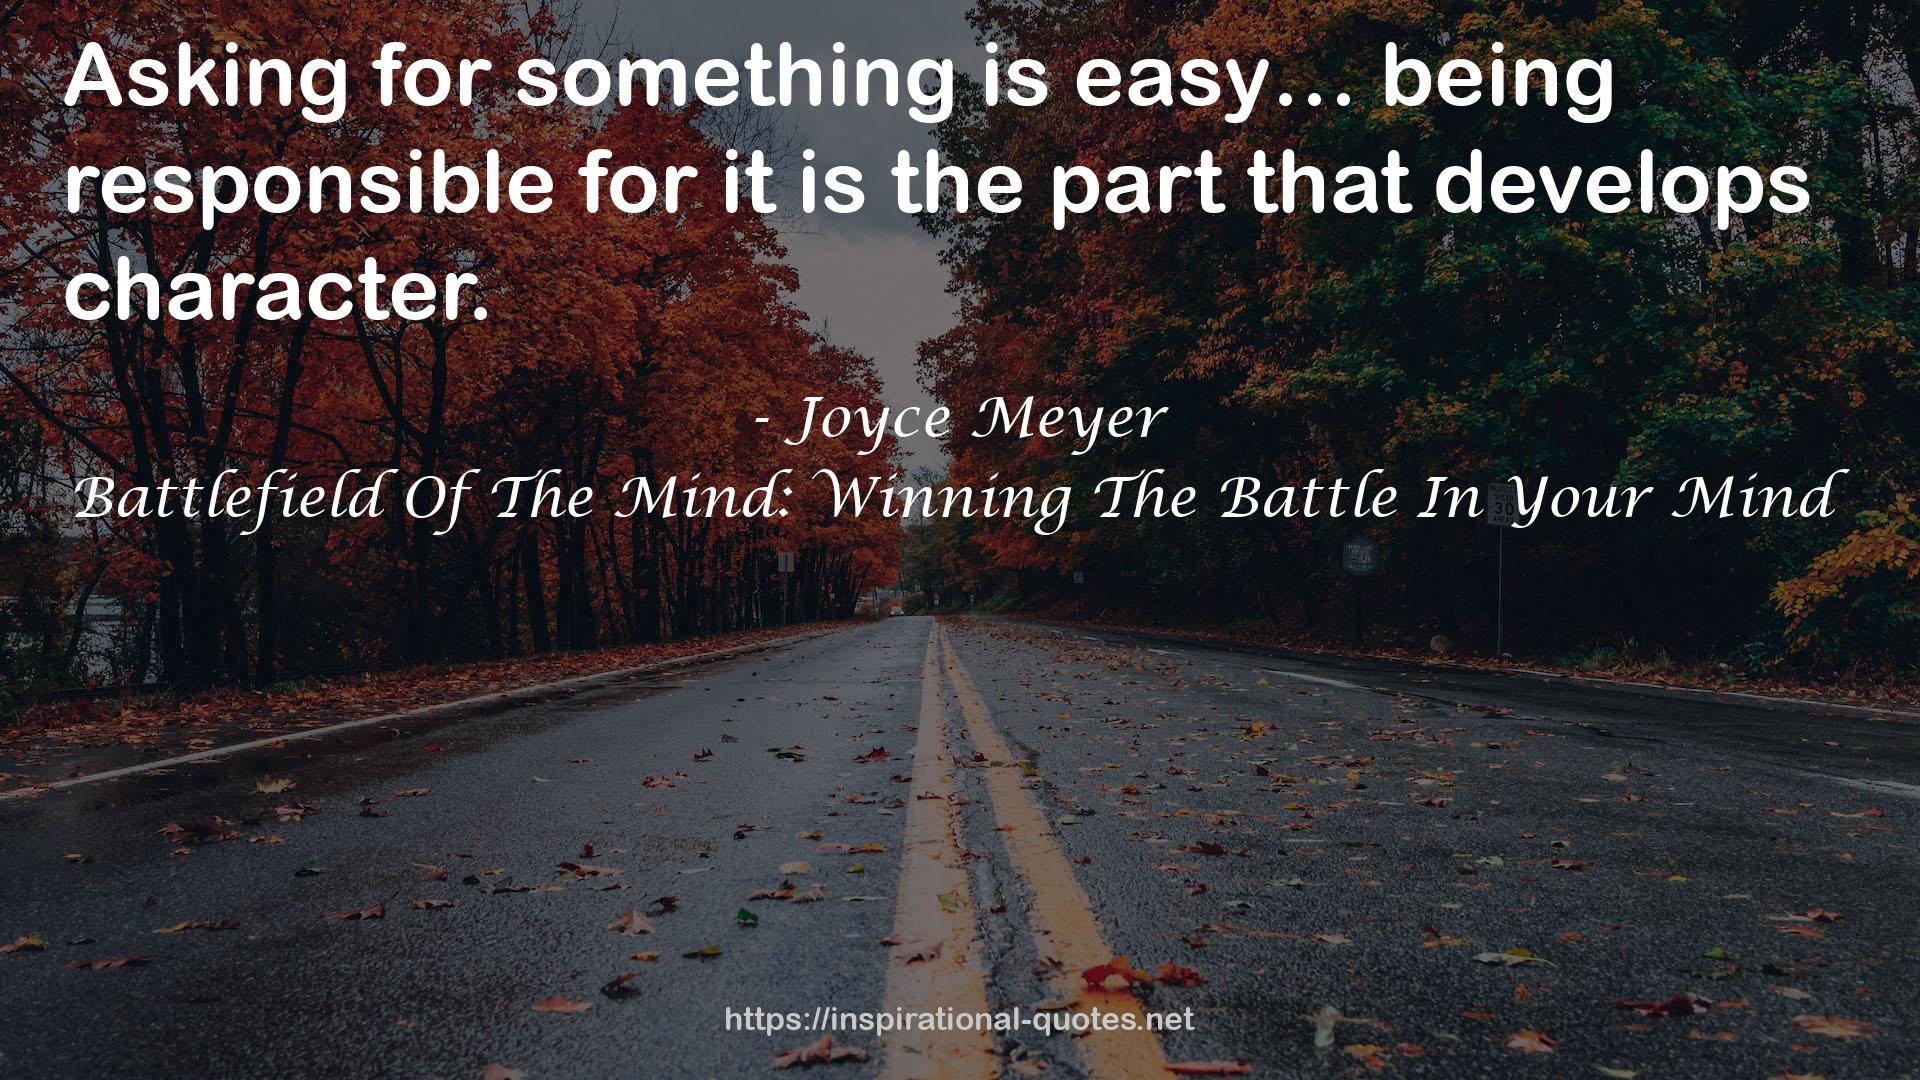 Battlefield Of The Mind: Winning The Battle In Your Mind QUOTES